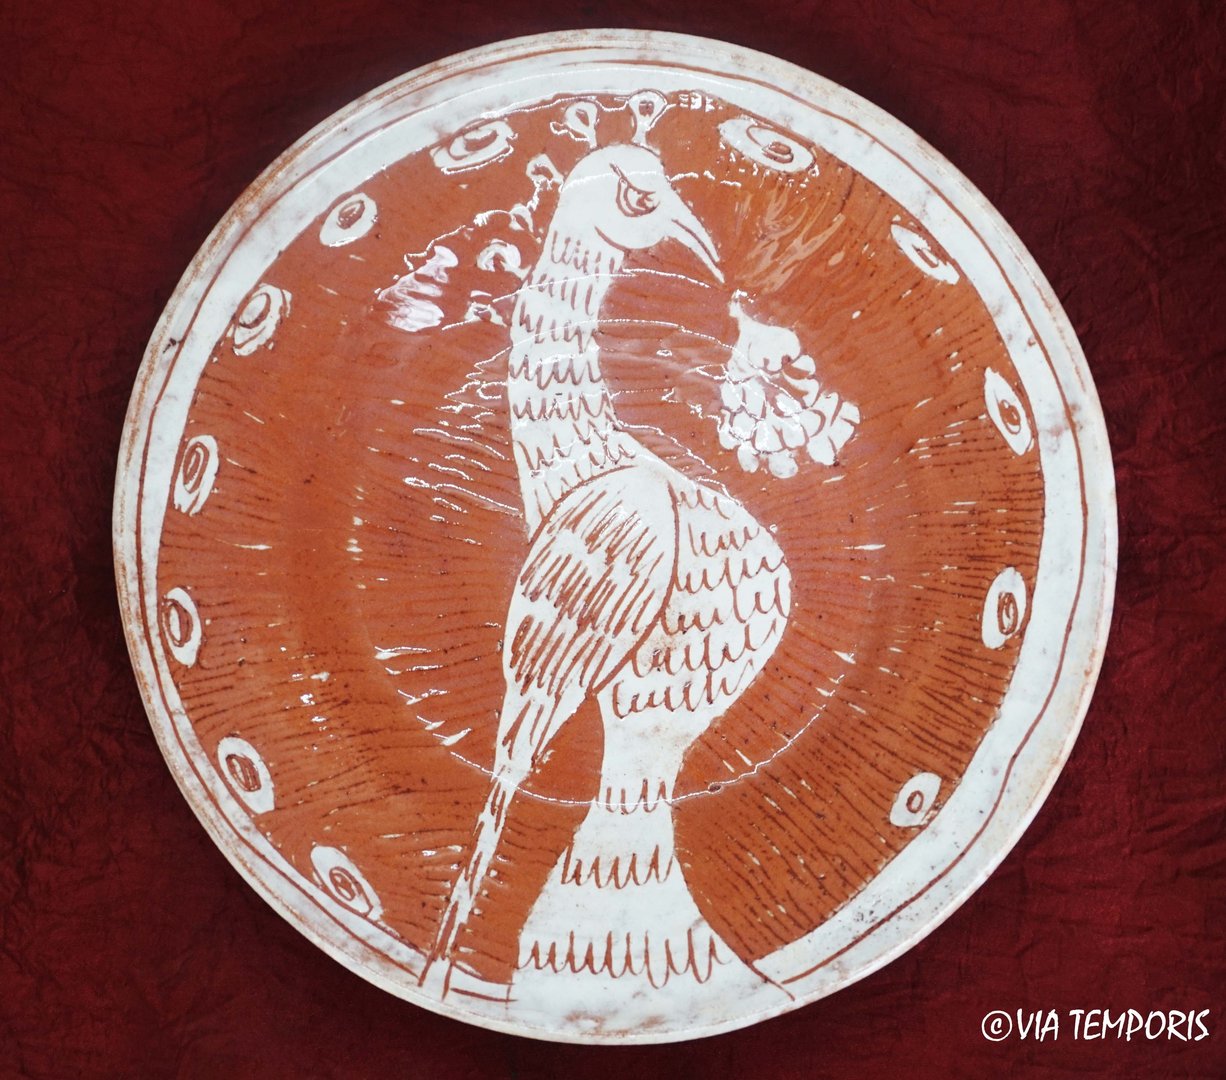 MEDIEVAL POTTERY - MAJOLICA PLATE WITH BIRD DECOR